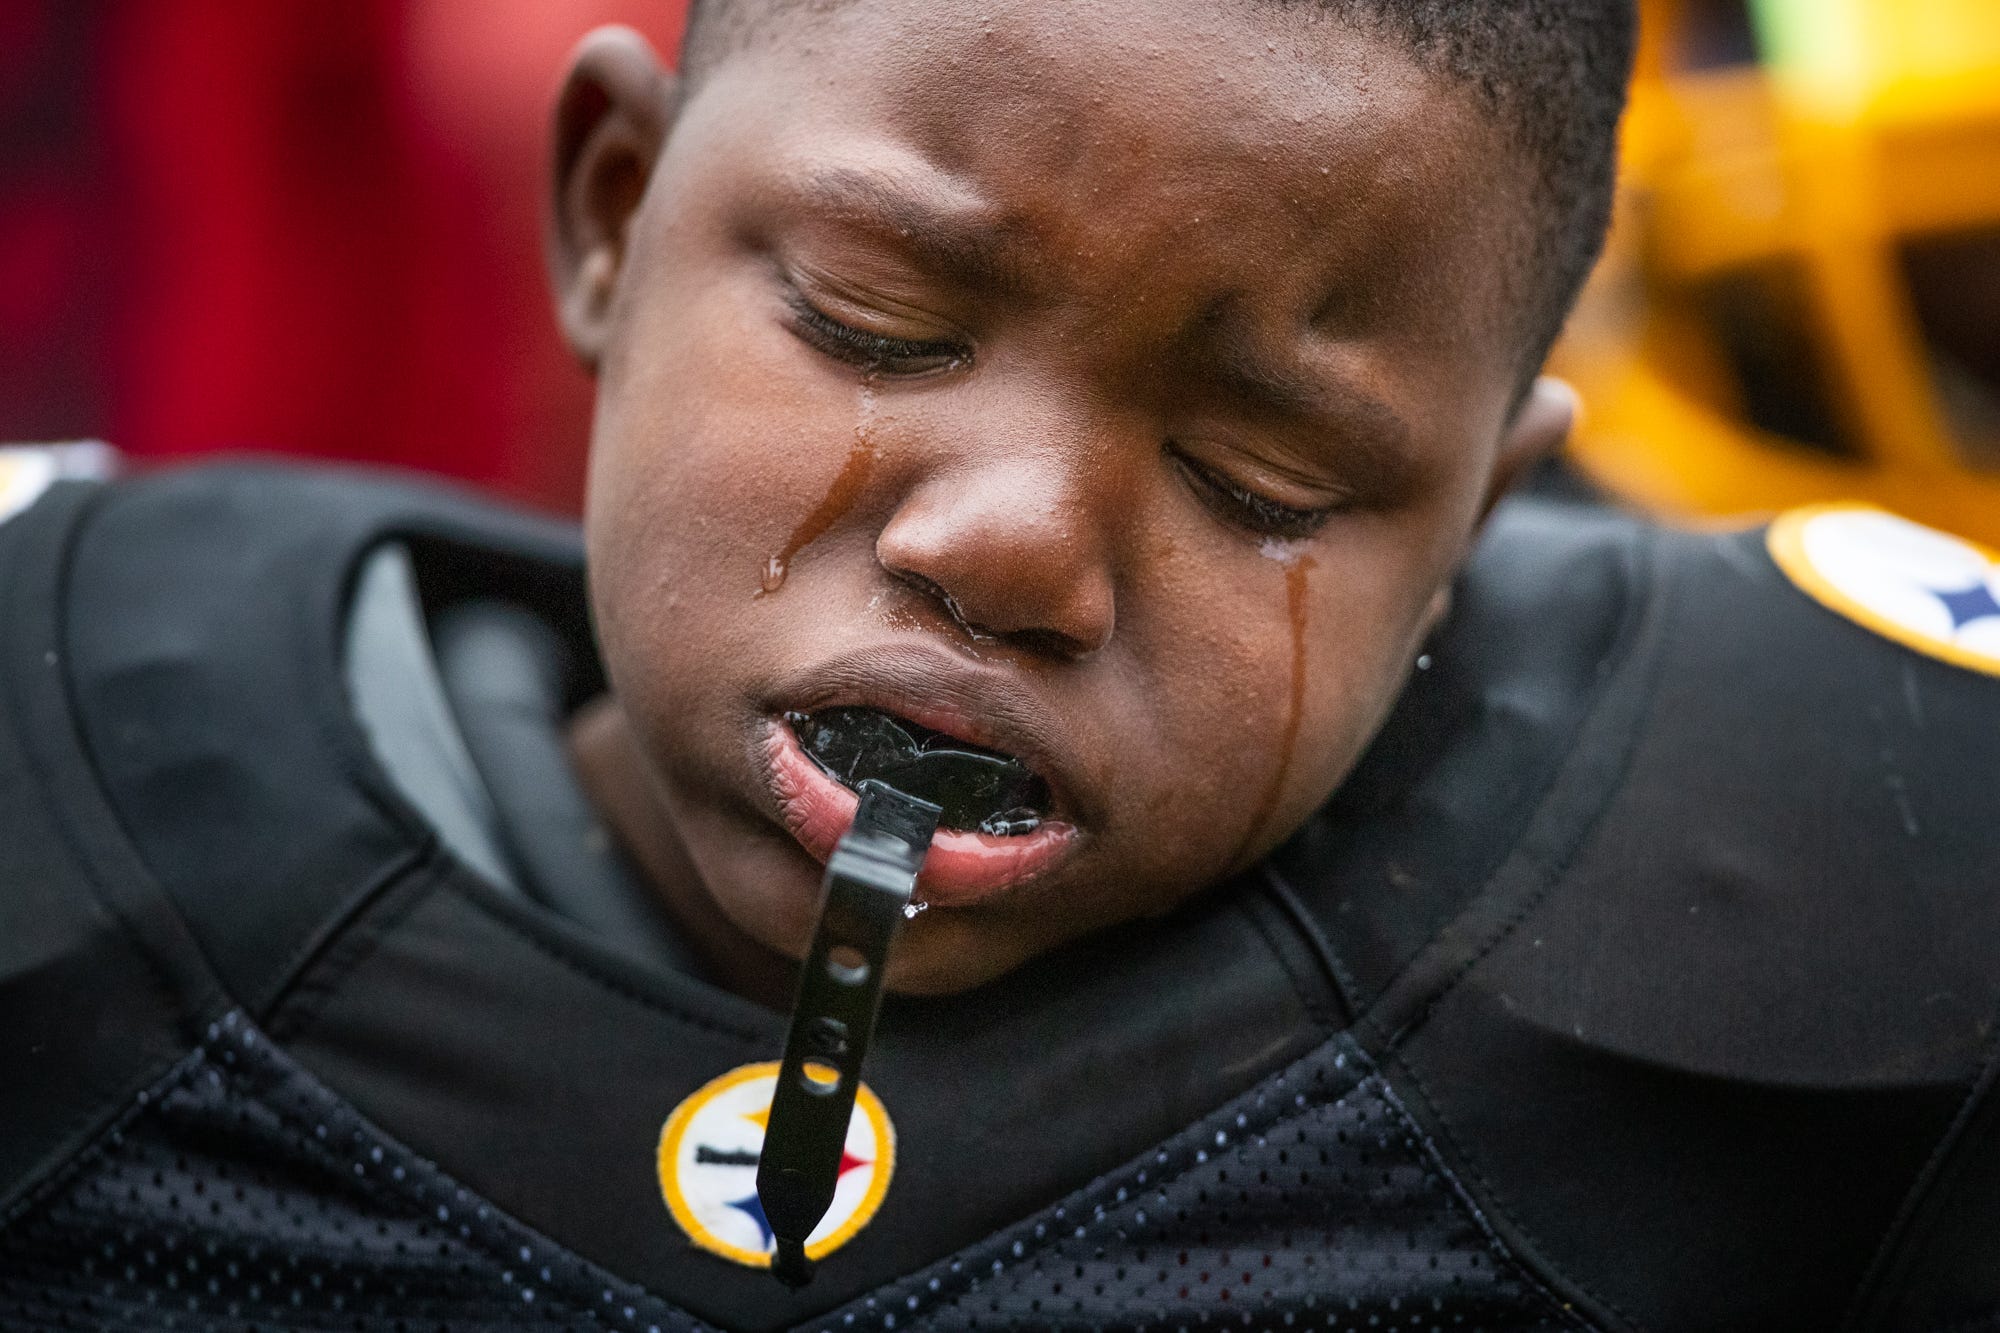 Tyson Delaney, 8, cries after the Indy Steelers' 8u team's overtime loss in the championship game against the City Colts on Saturday, Oct. 28, 2018. "You played your hearts out, keep those heads up," said coach Donnell Hamilton. Hamilton started the Indy Steelers in 2005 with the aim to keep kids on a positive path. Hamilton lost his full-ride college scholarship after an incident with friends where guns were in the car. Hamilton had to serve time in prison. He would not graduate. "I done been through what you been through. Your struggle is familiar for me," he said to the kids on his team. "So, going through my struggle, getting out of my struggle and becoming more positive in my life, that's what turned me into what I am today. A beautiful struggle."